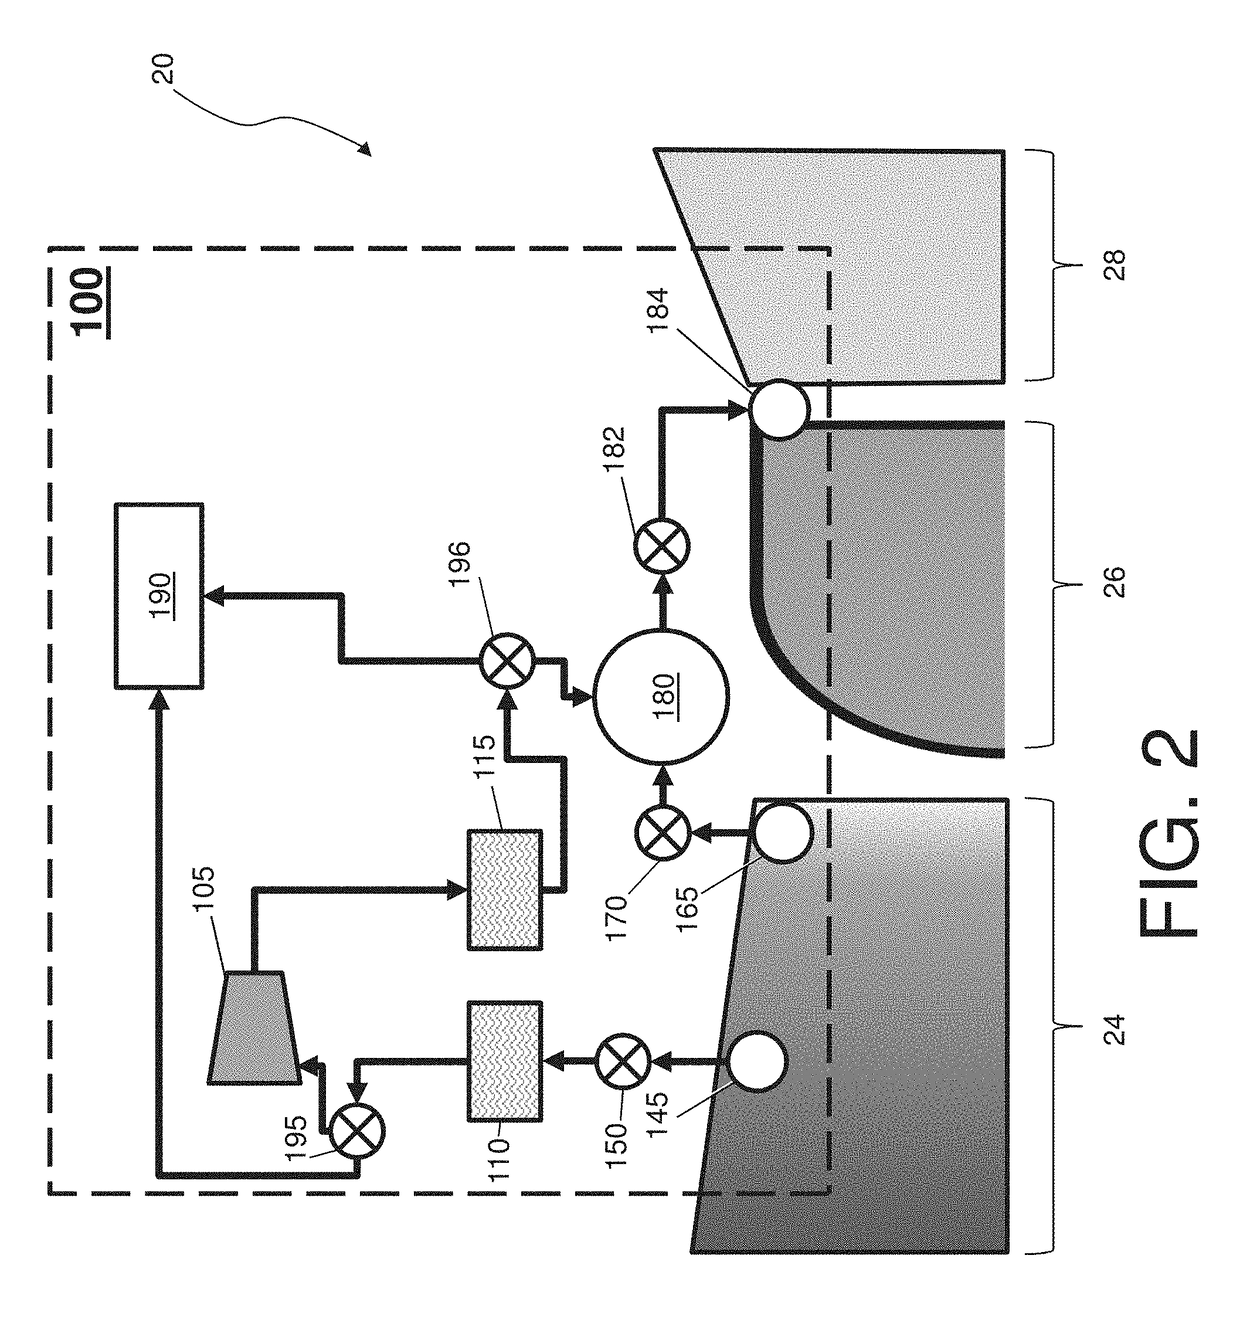 Intercooled cooled cooling integrated air cycle machine